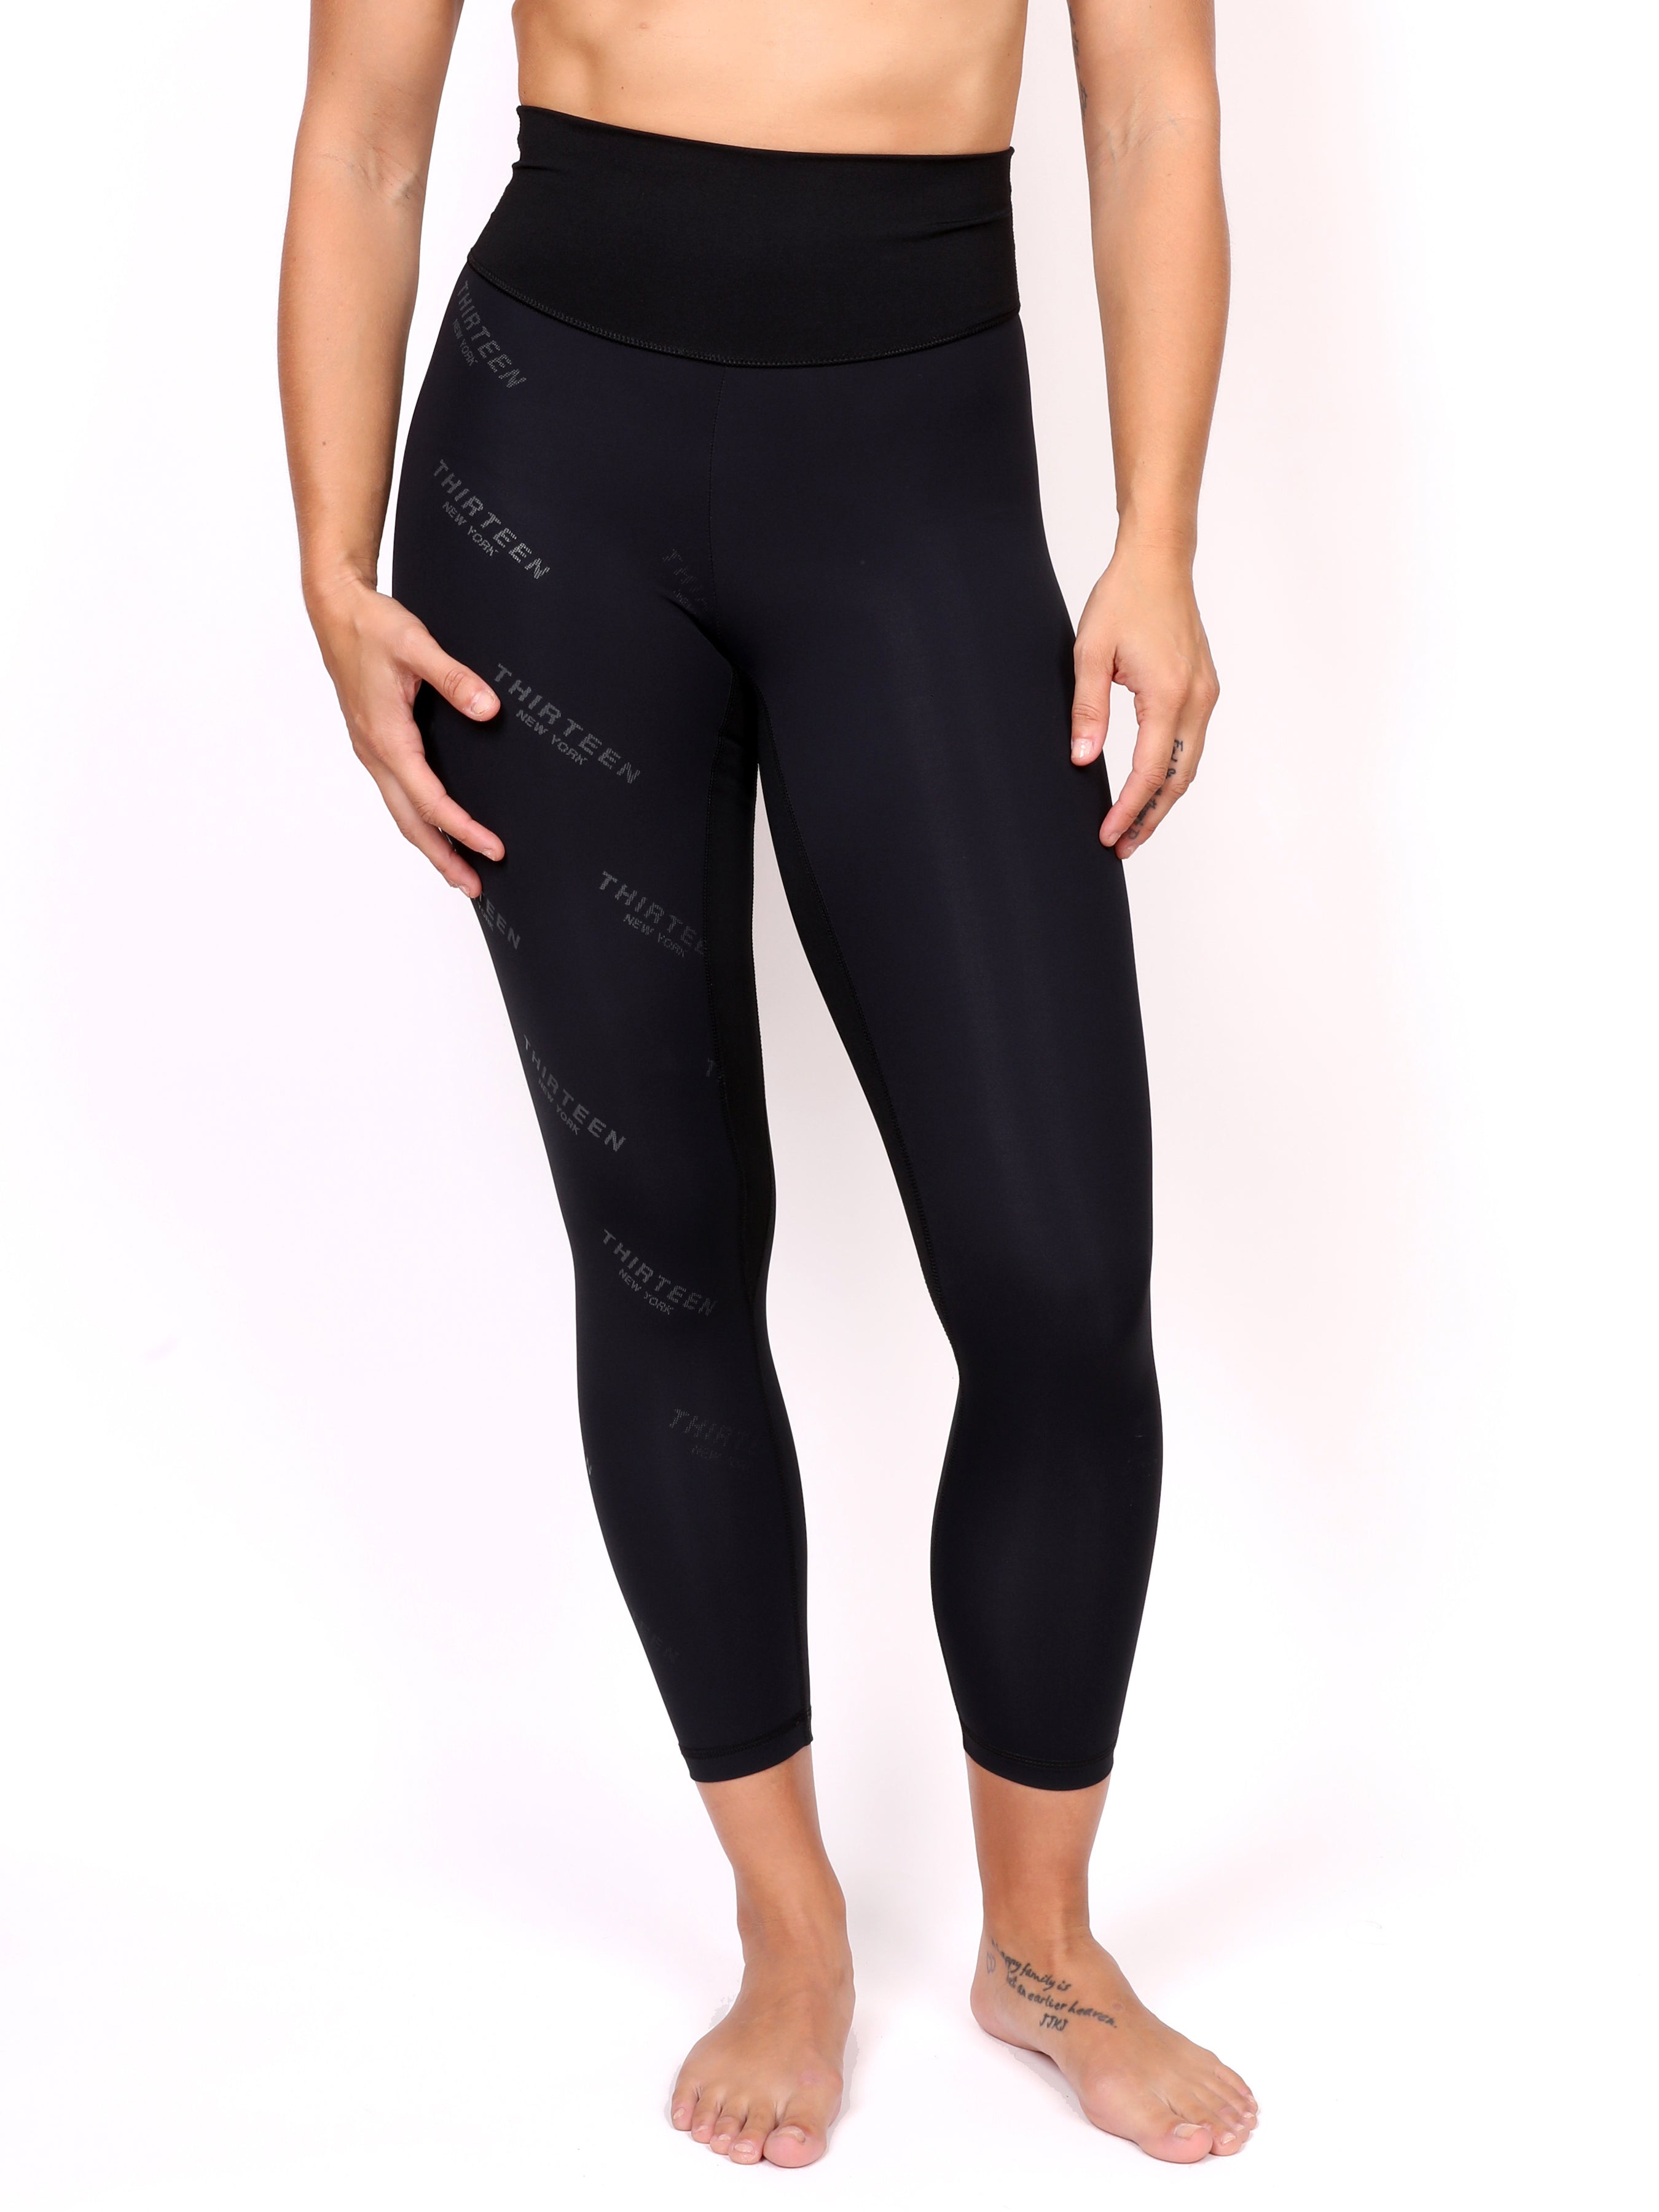 All Womens Compression Tights, T-shirts, Accessories